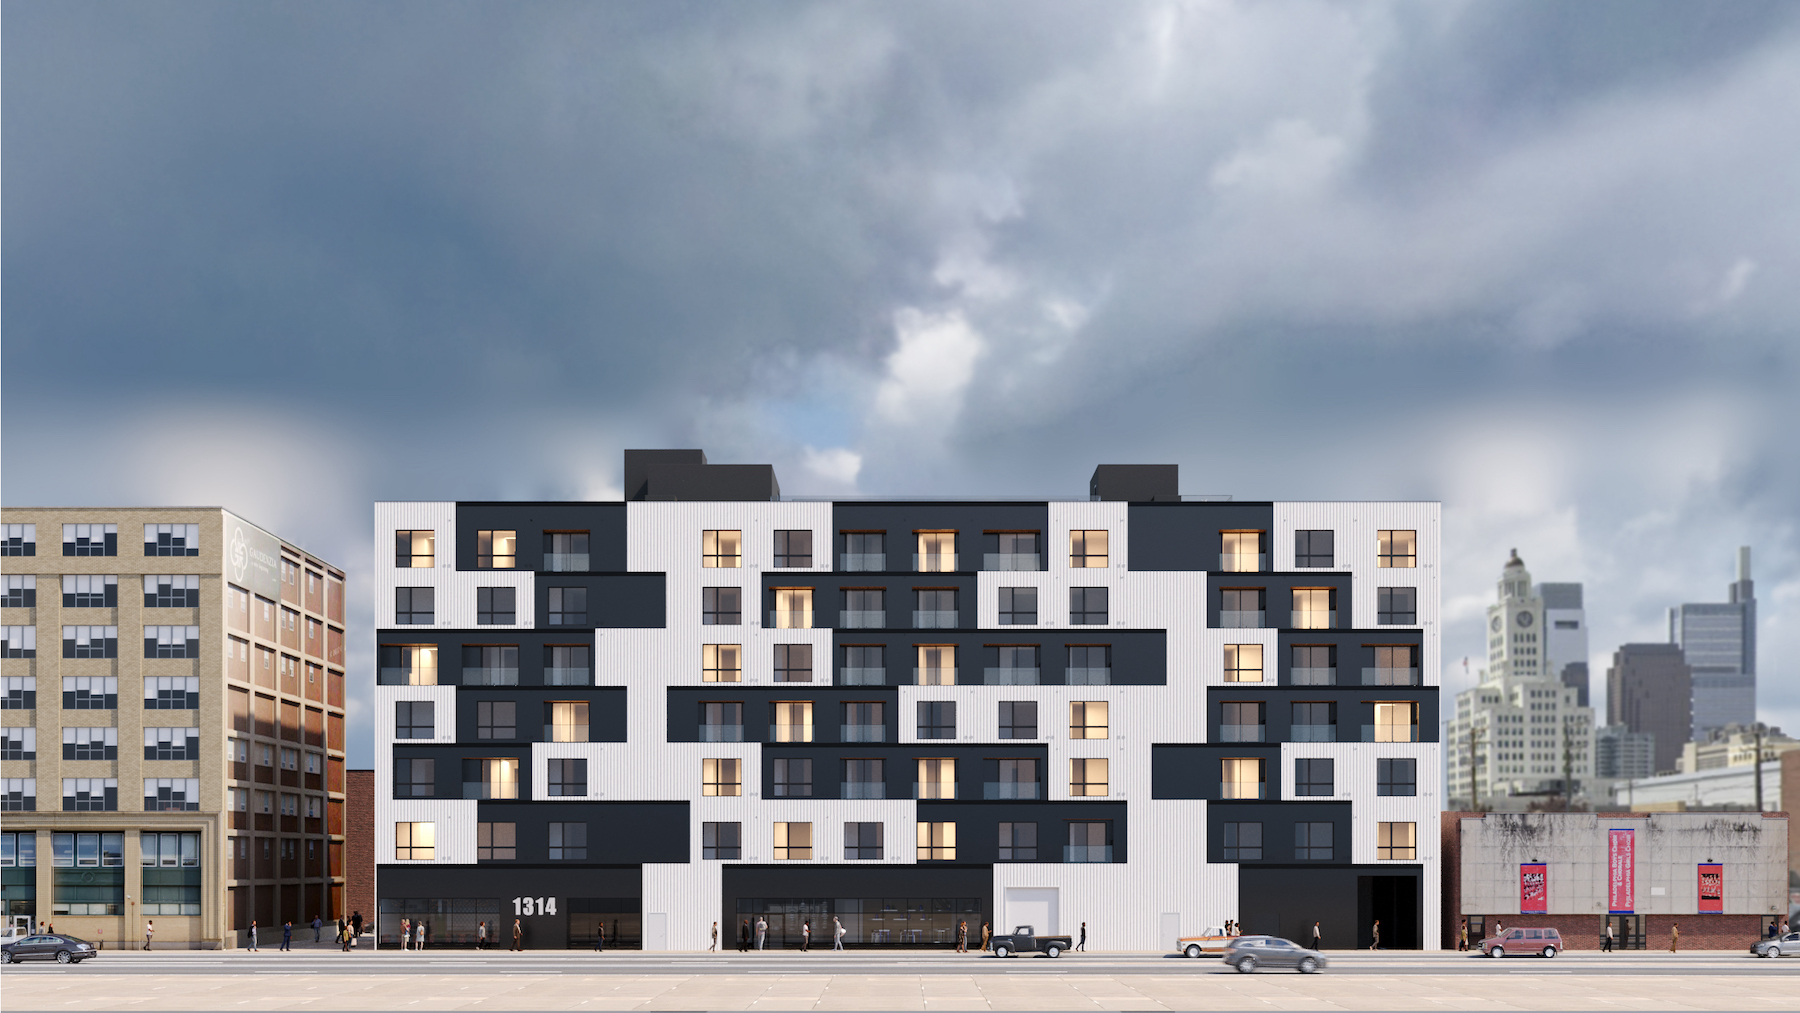 Rendering of 1314 Spring Garden Street, a residential building whose modules will be manufactured offsite. Images: Volumetric Building Company